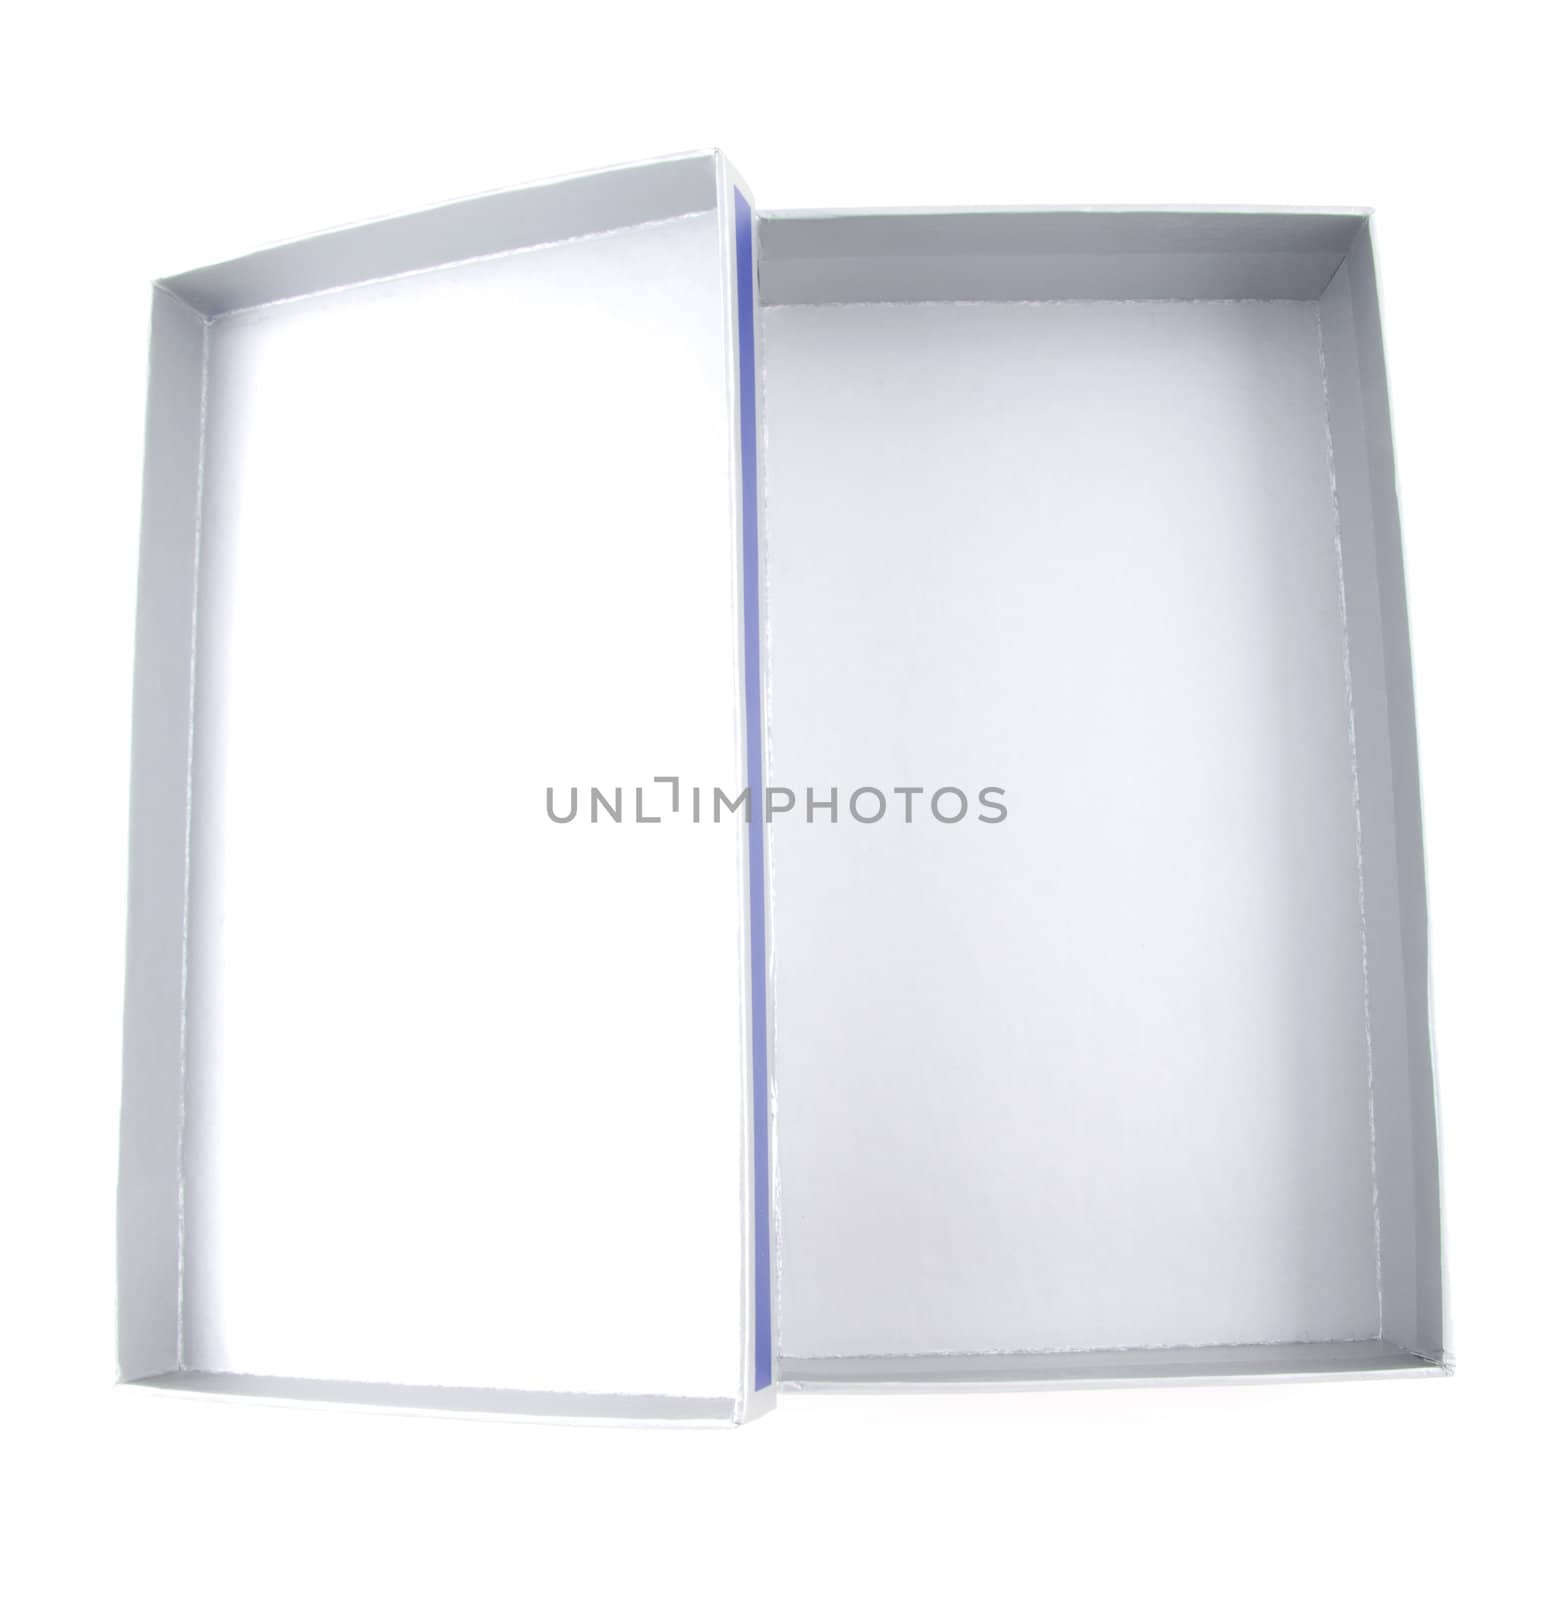 Open box on white background for site